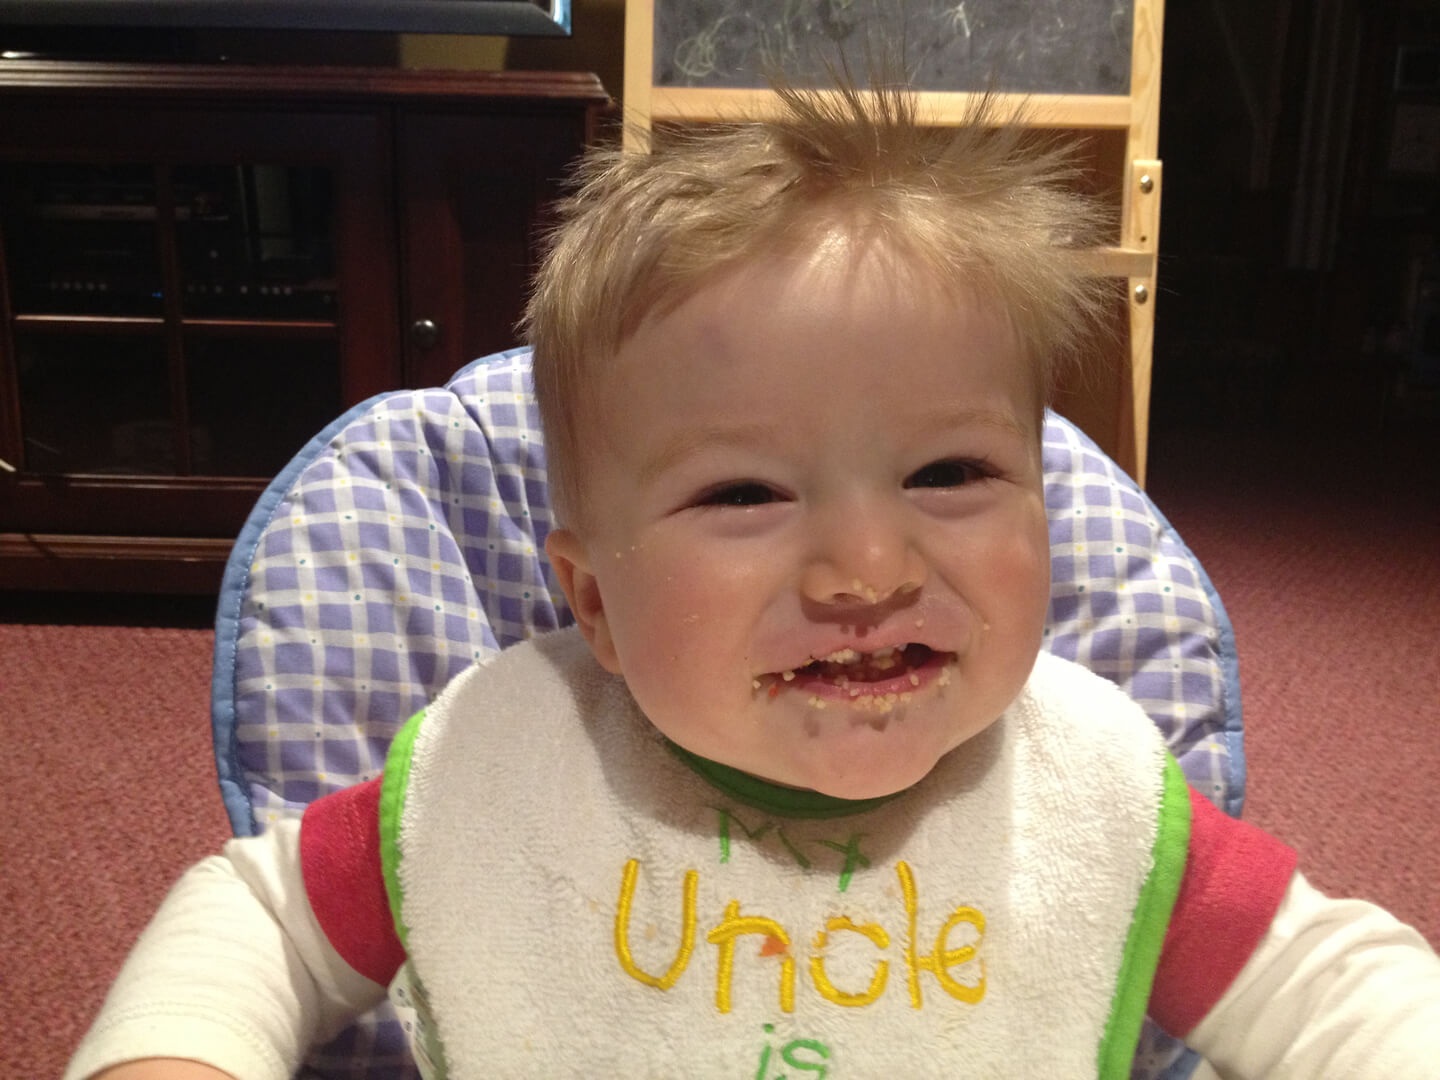 Smiling kid with crumbs on his face